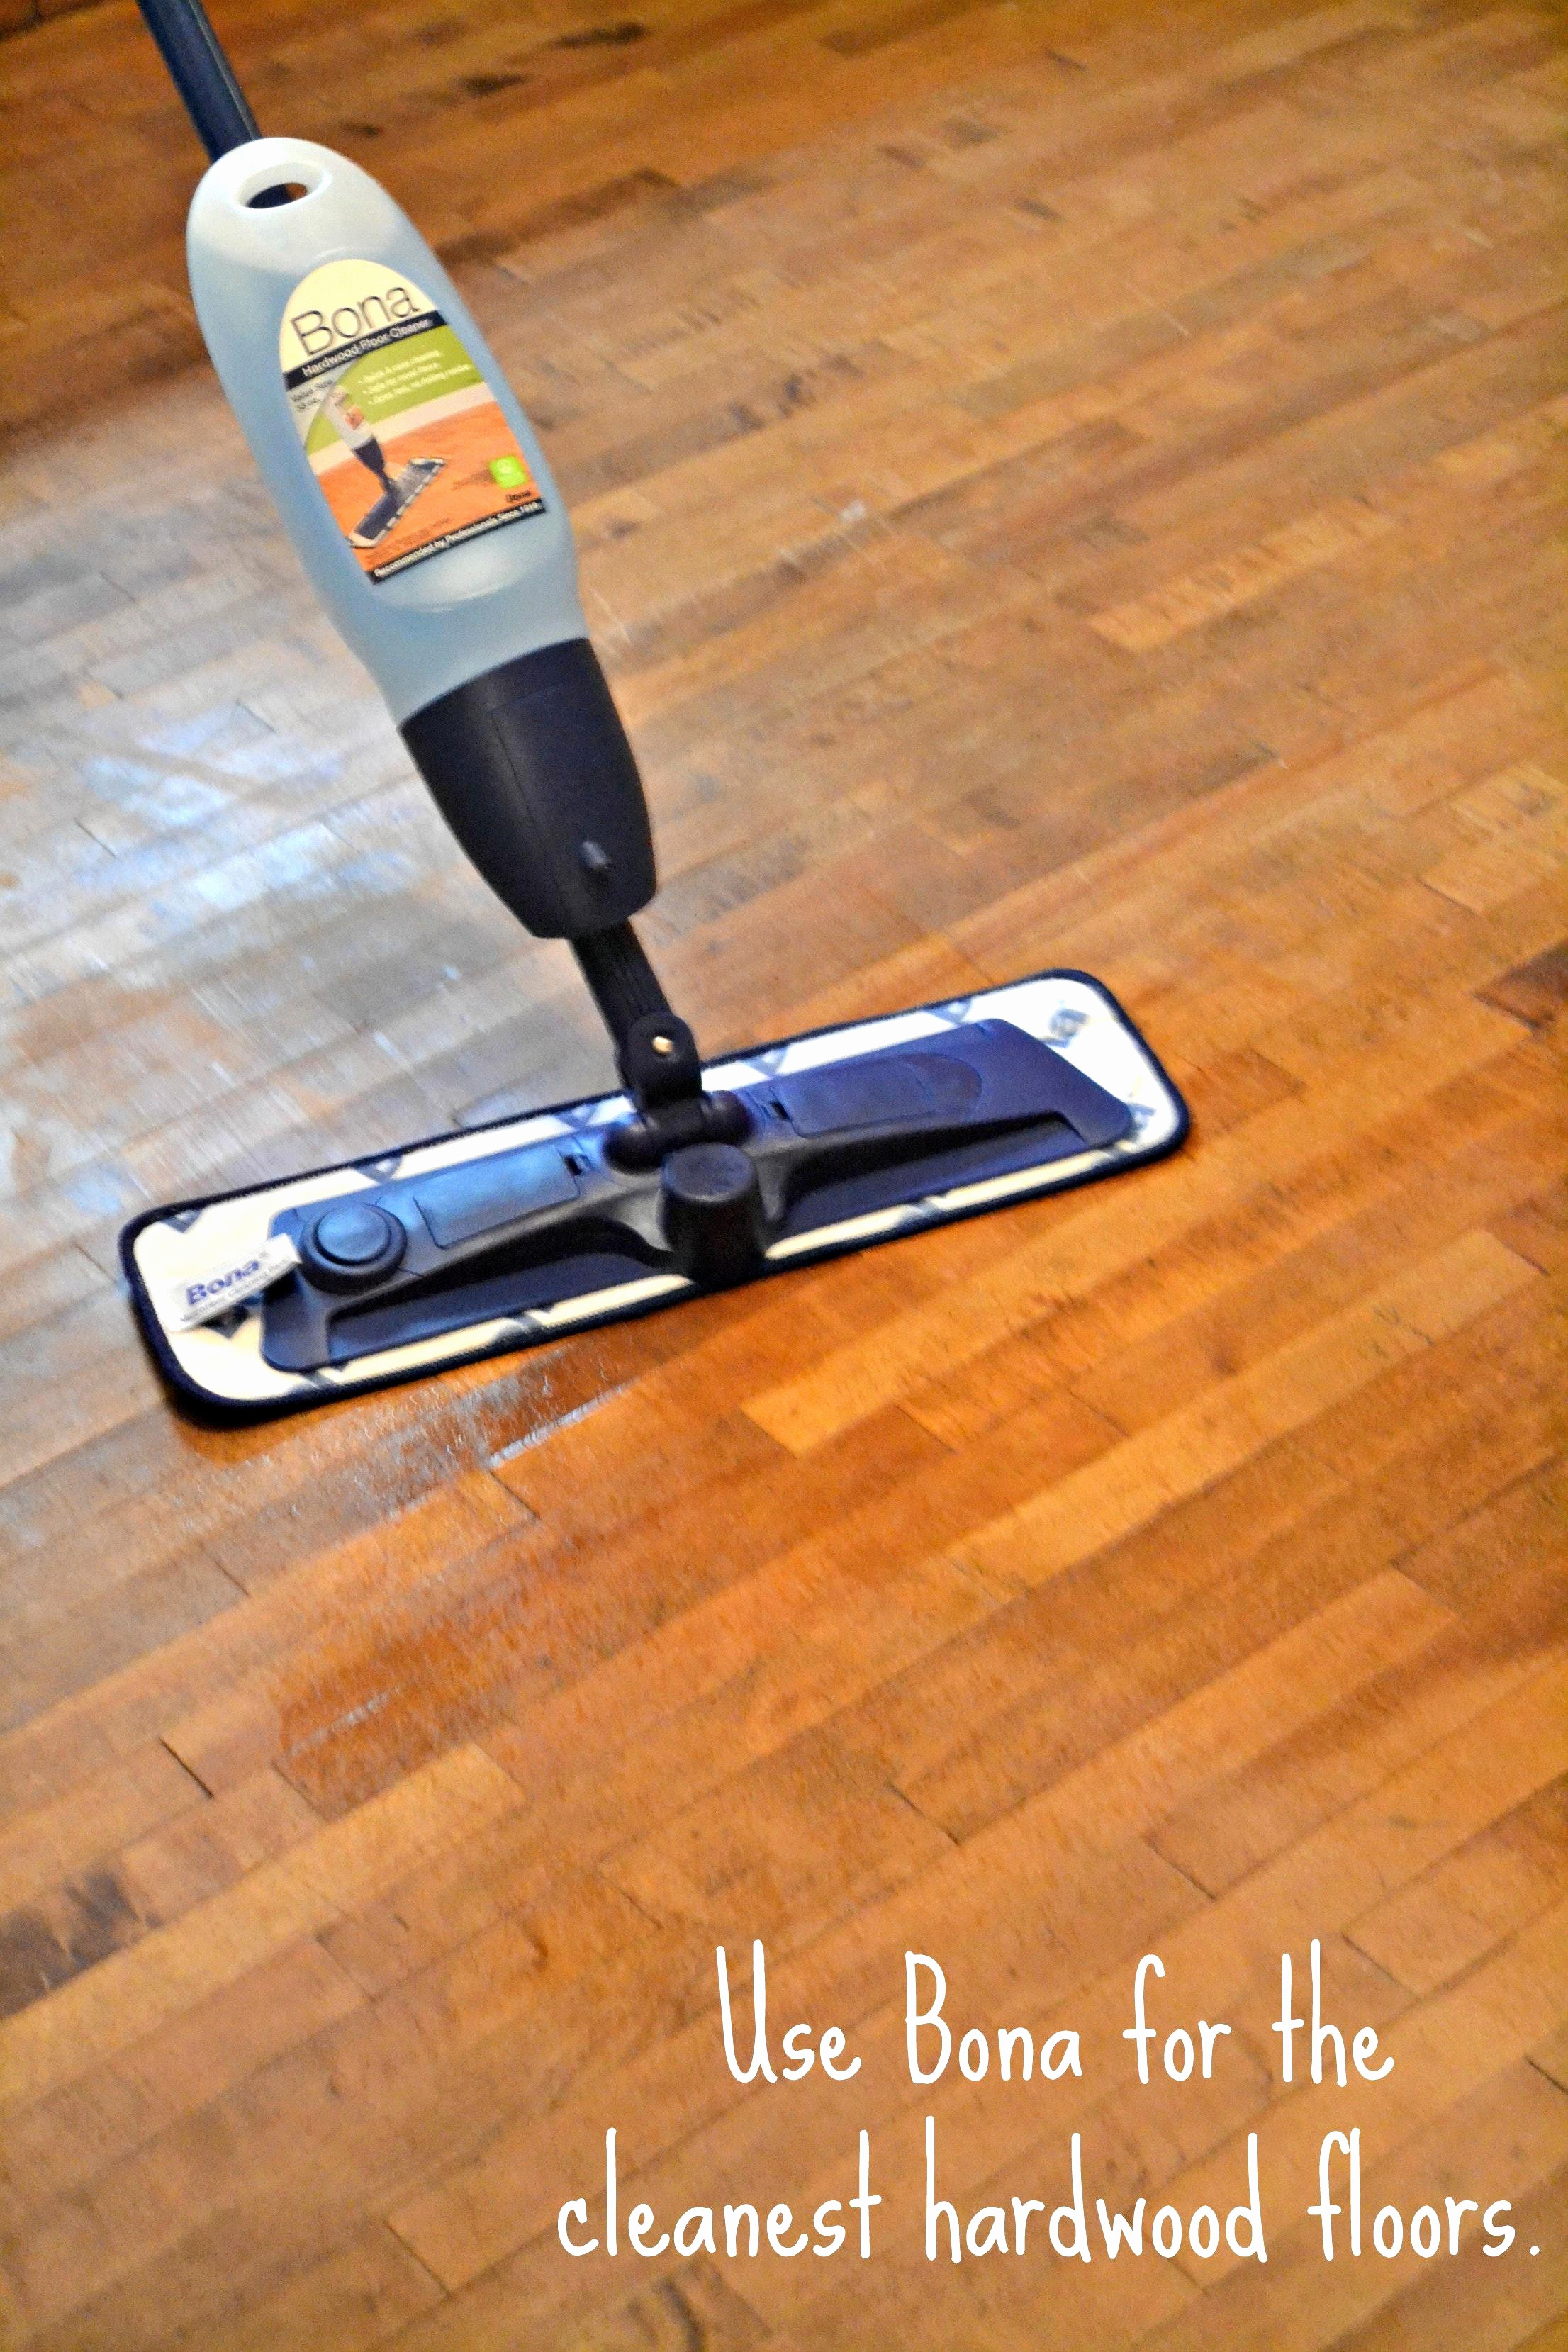 can i clean hardwood floors with vinegar and water of breathtaking clean hardwood floors with vinegar beautiful floors with breathtaking clean hardwood floor with vinegar 50 unique how to pic photo picture of july 2018